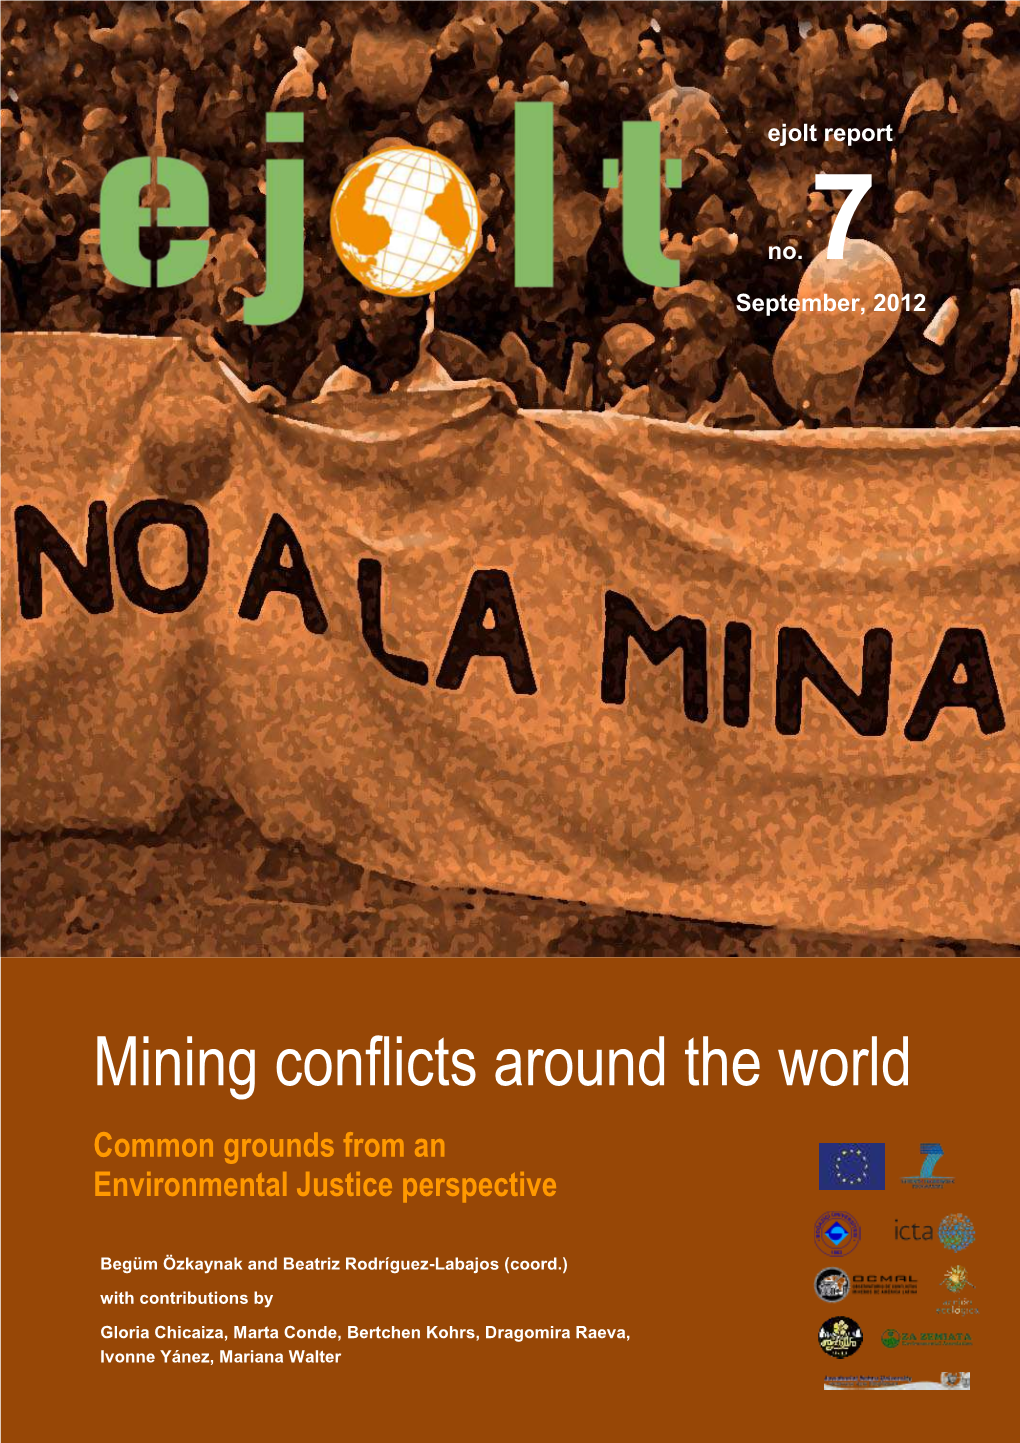 Mining Conflicts Around the World - September 2012